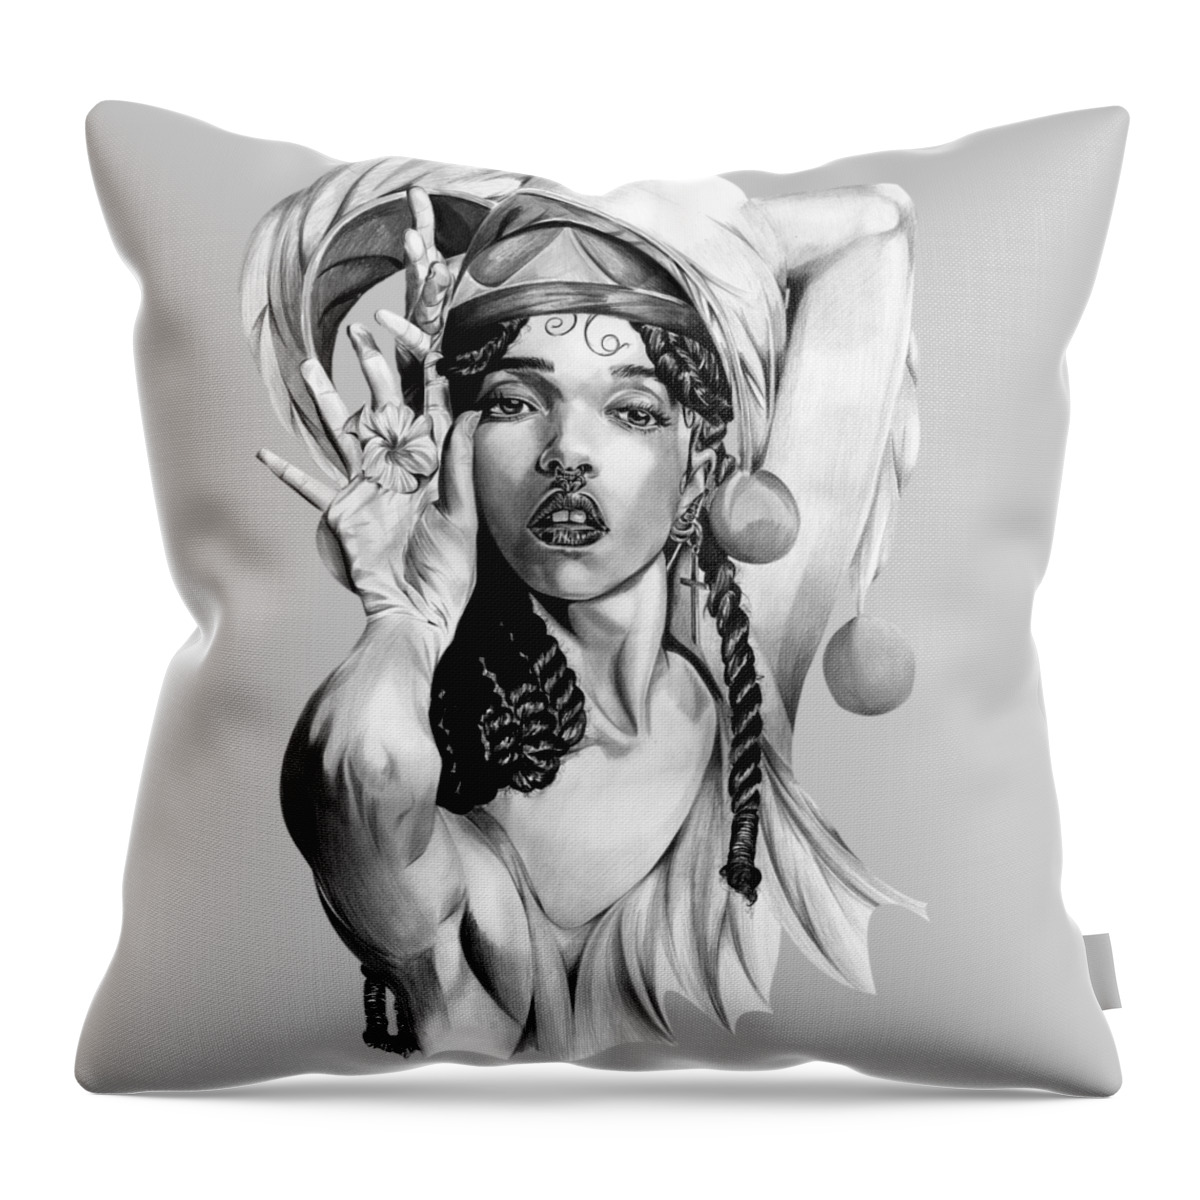 Fka Throw Pillow featuring the drawing Twigs #1 by Terri Meredith